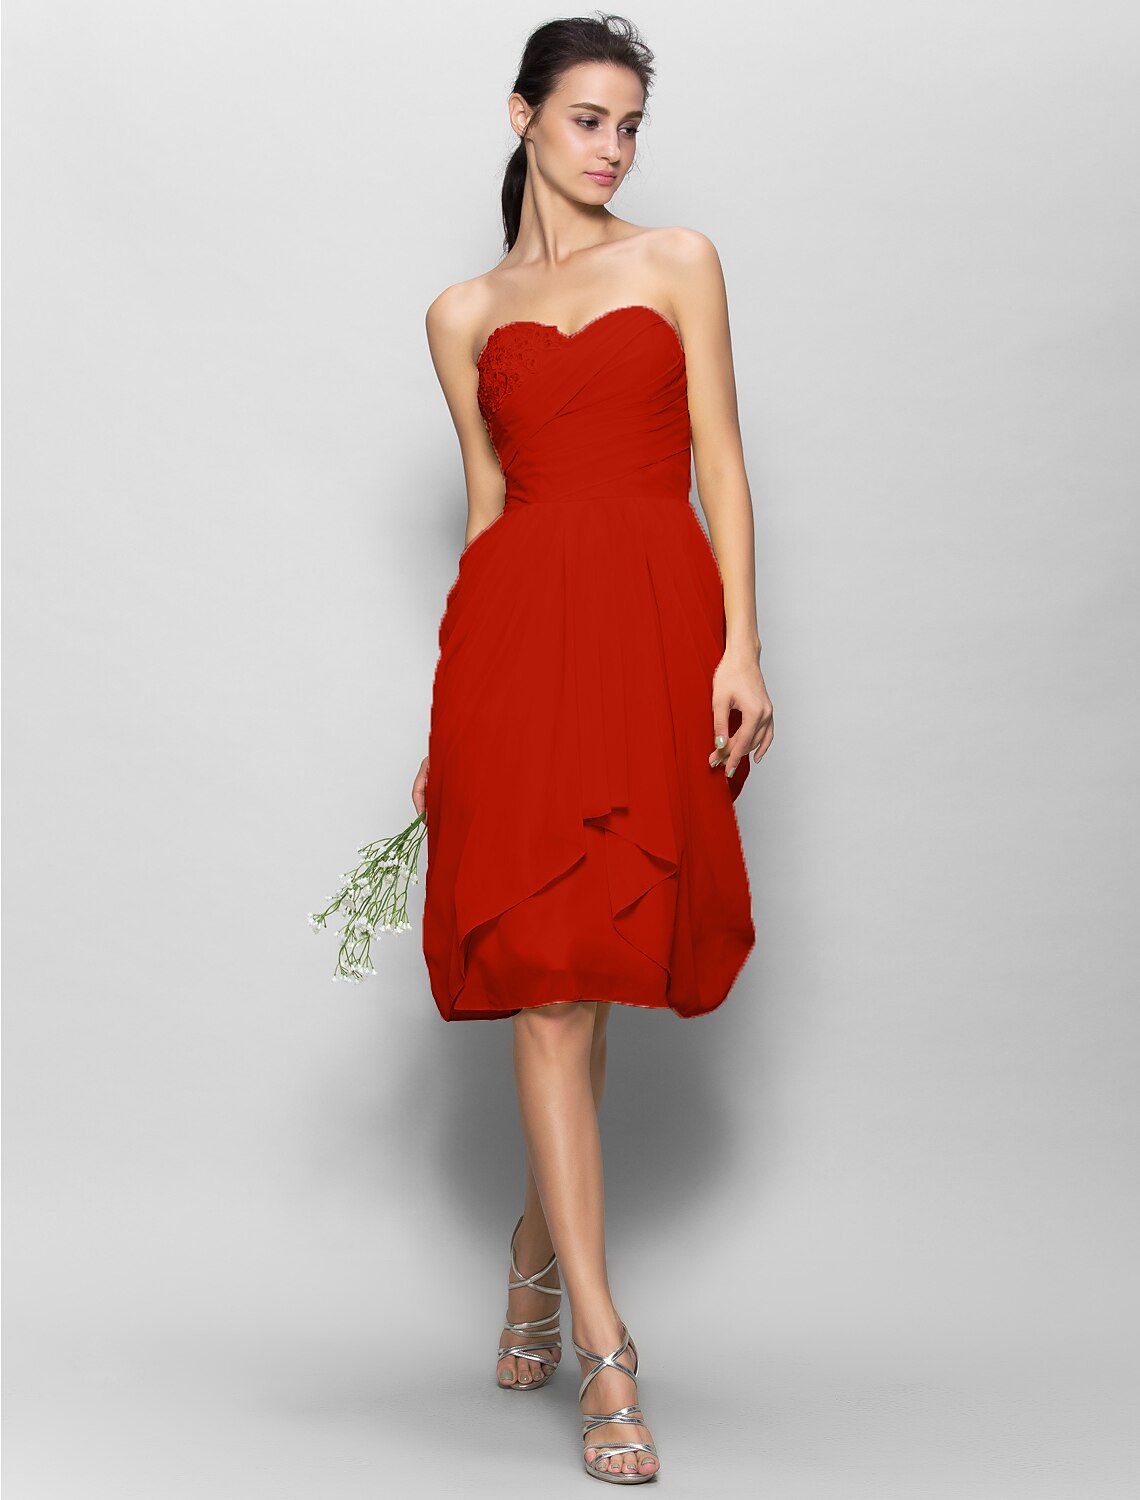 A-Line Sweetheart Neckline Knee Length Chiffon Bridesmaid Dress with Appliques Draping